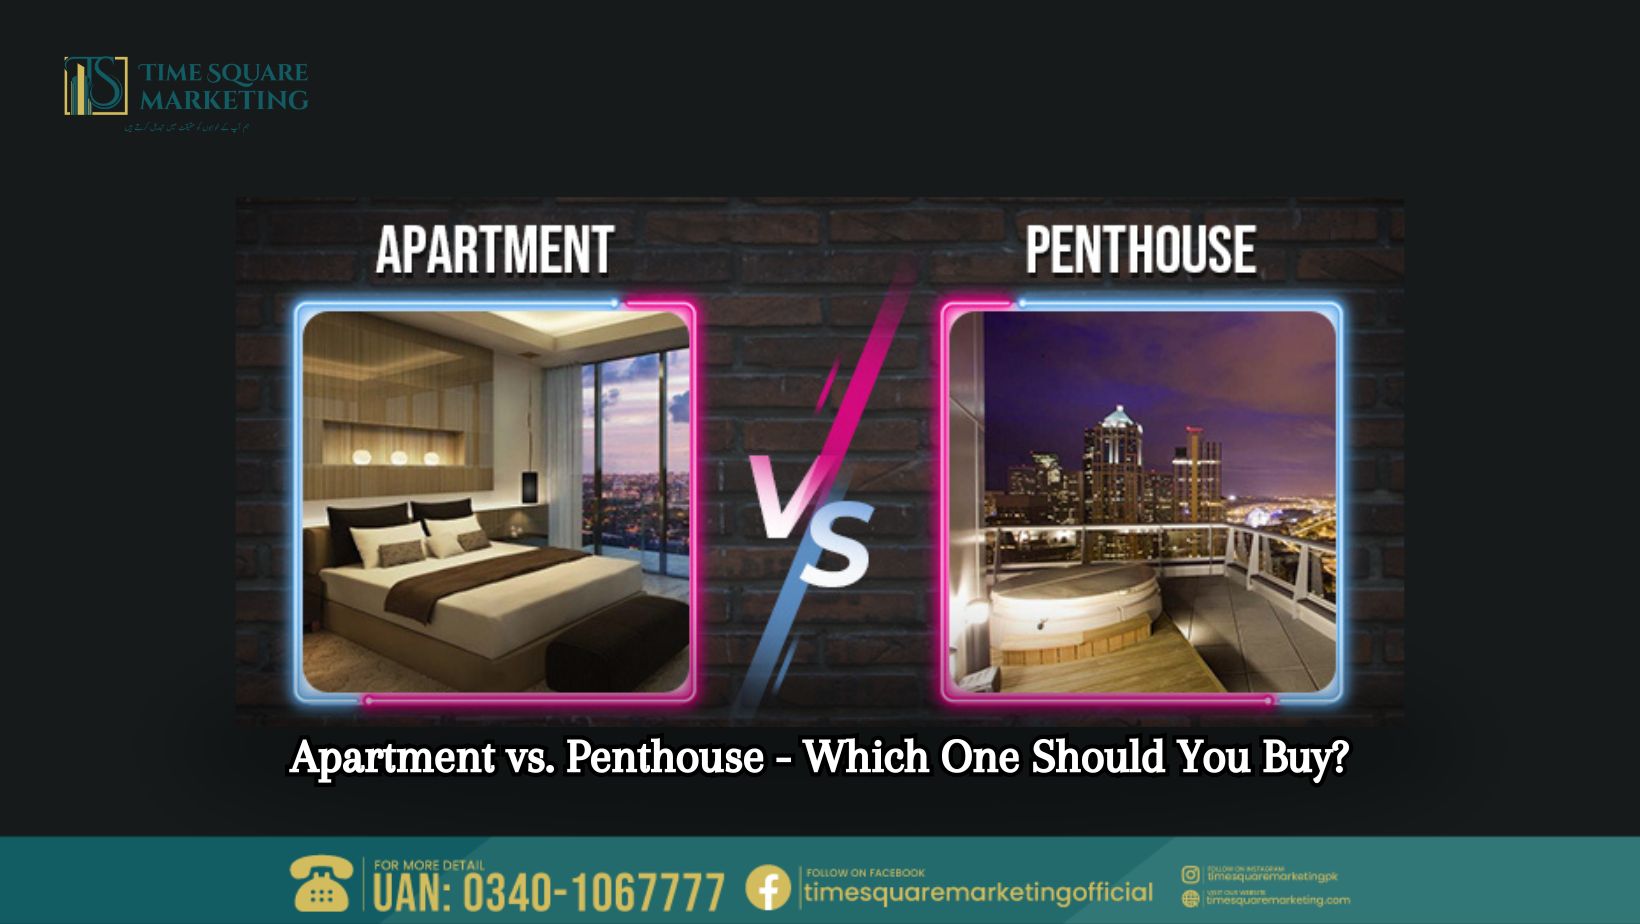 Apartment vs. Penthouse - Which One Should You Buy